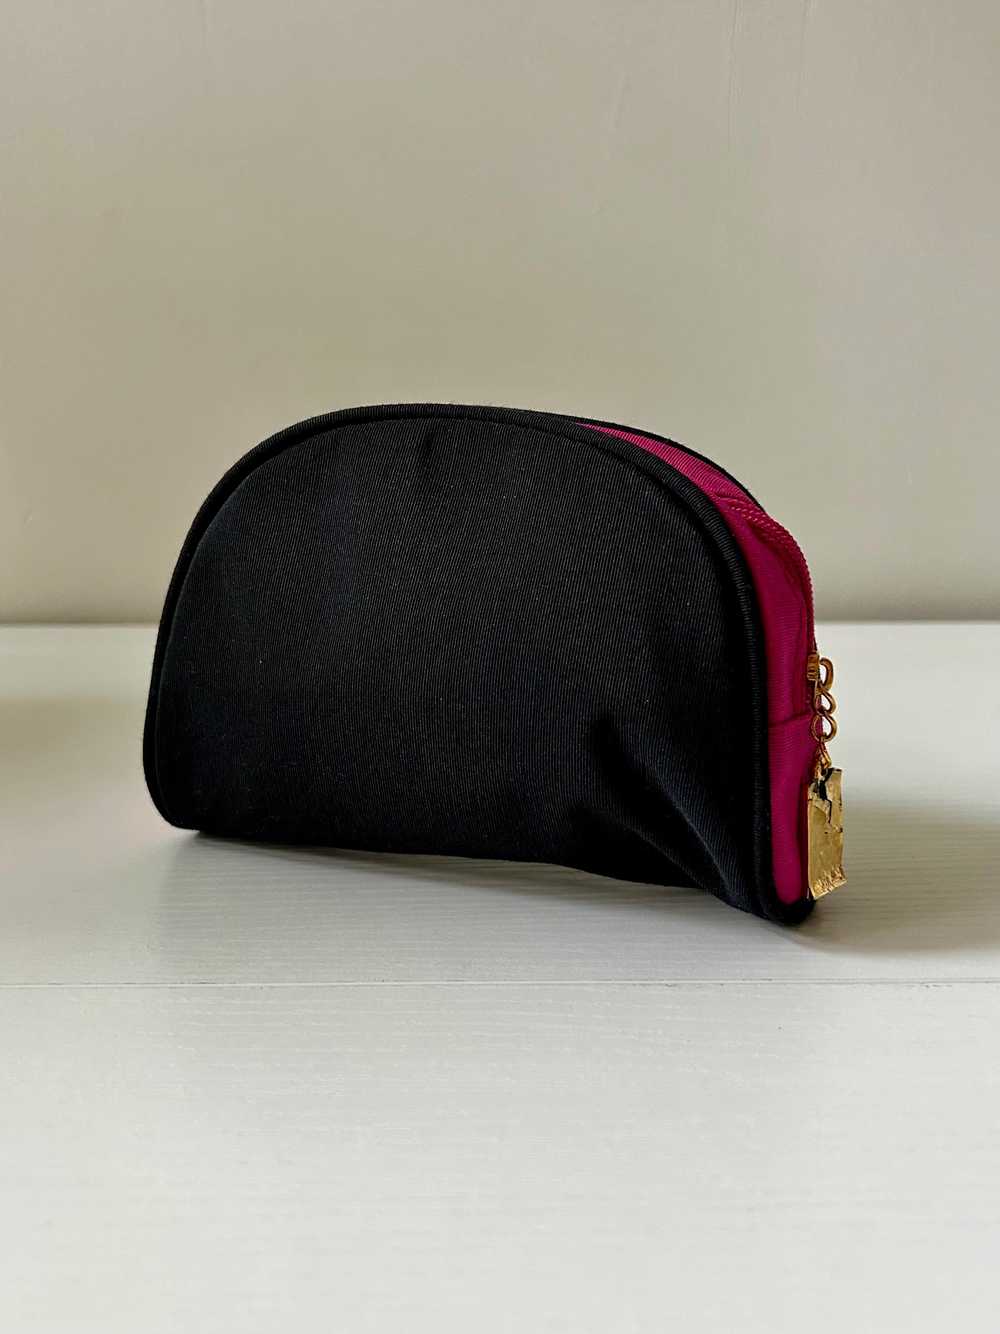 Vintage YSL Black and Hot Pink Makeup Pouch - image 2